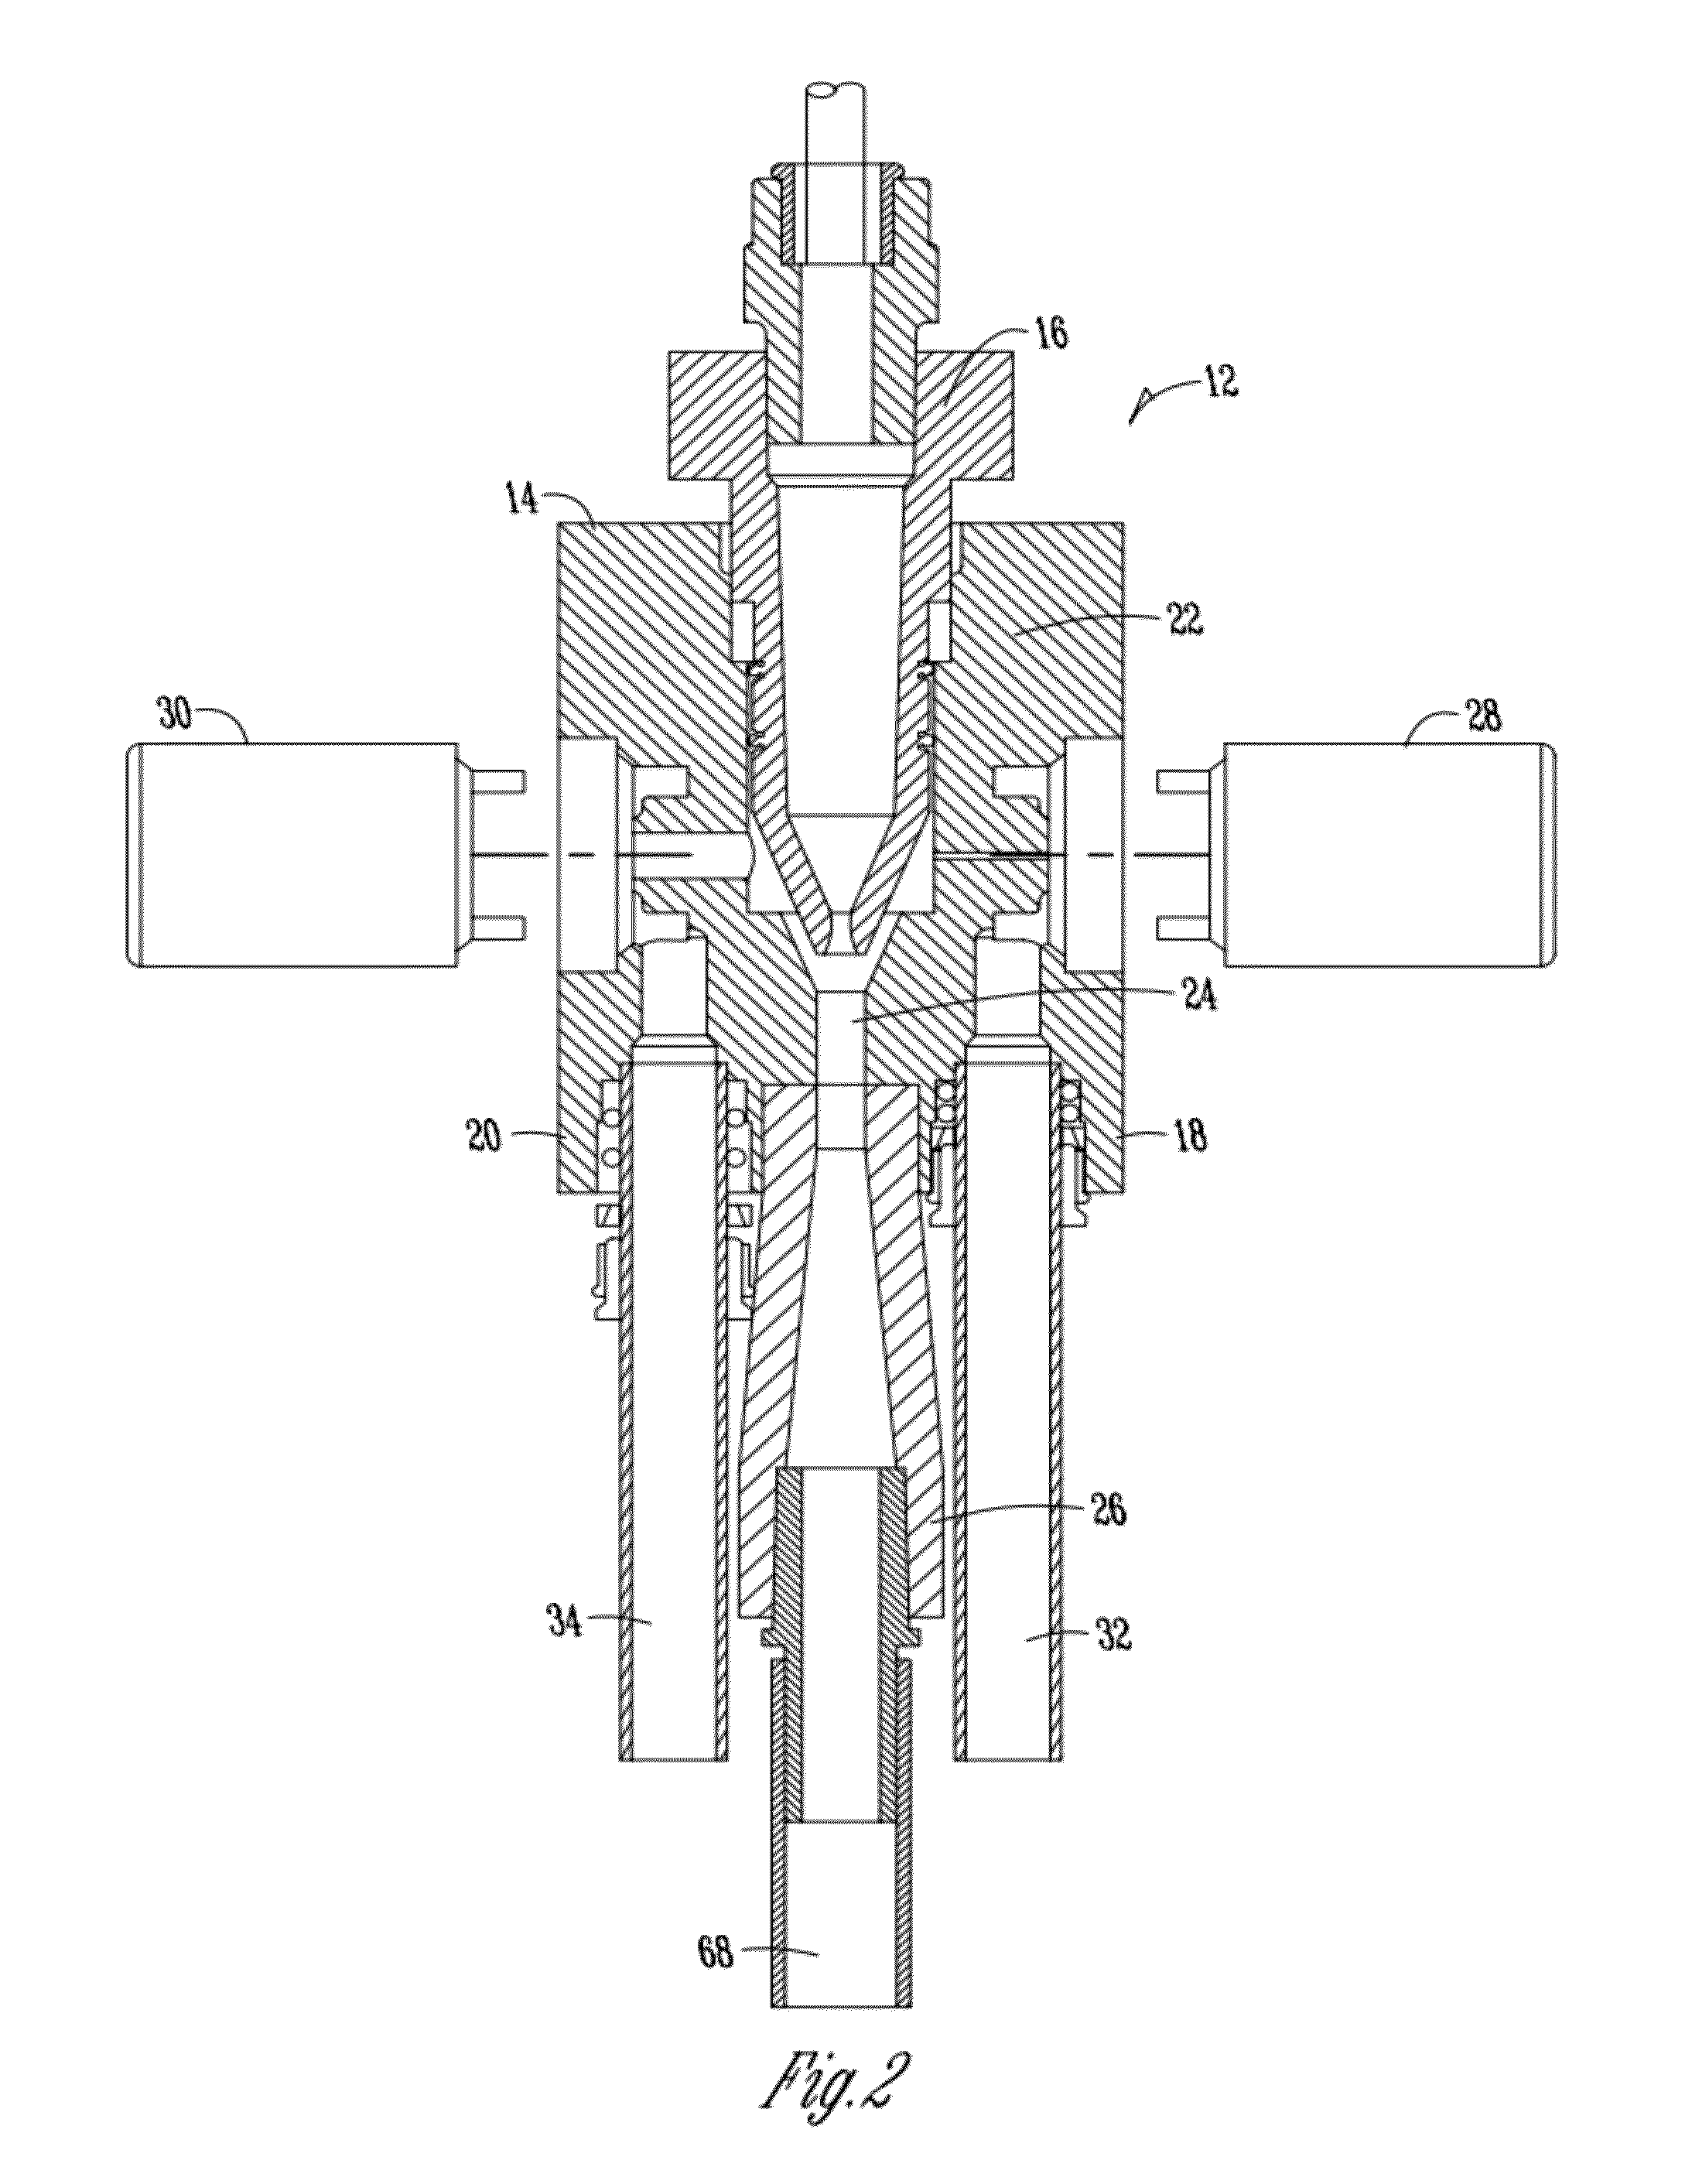 Method, apparatus and system for accurately measuring and calibrating liquid components dispensed from a dispenser